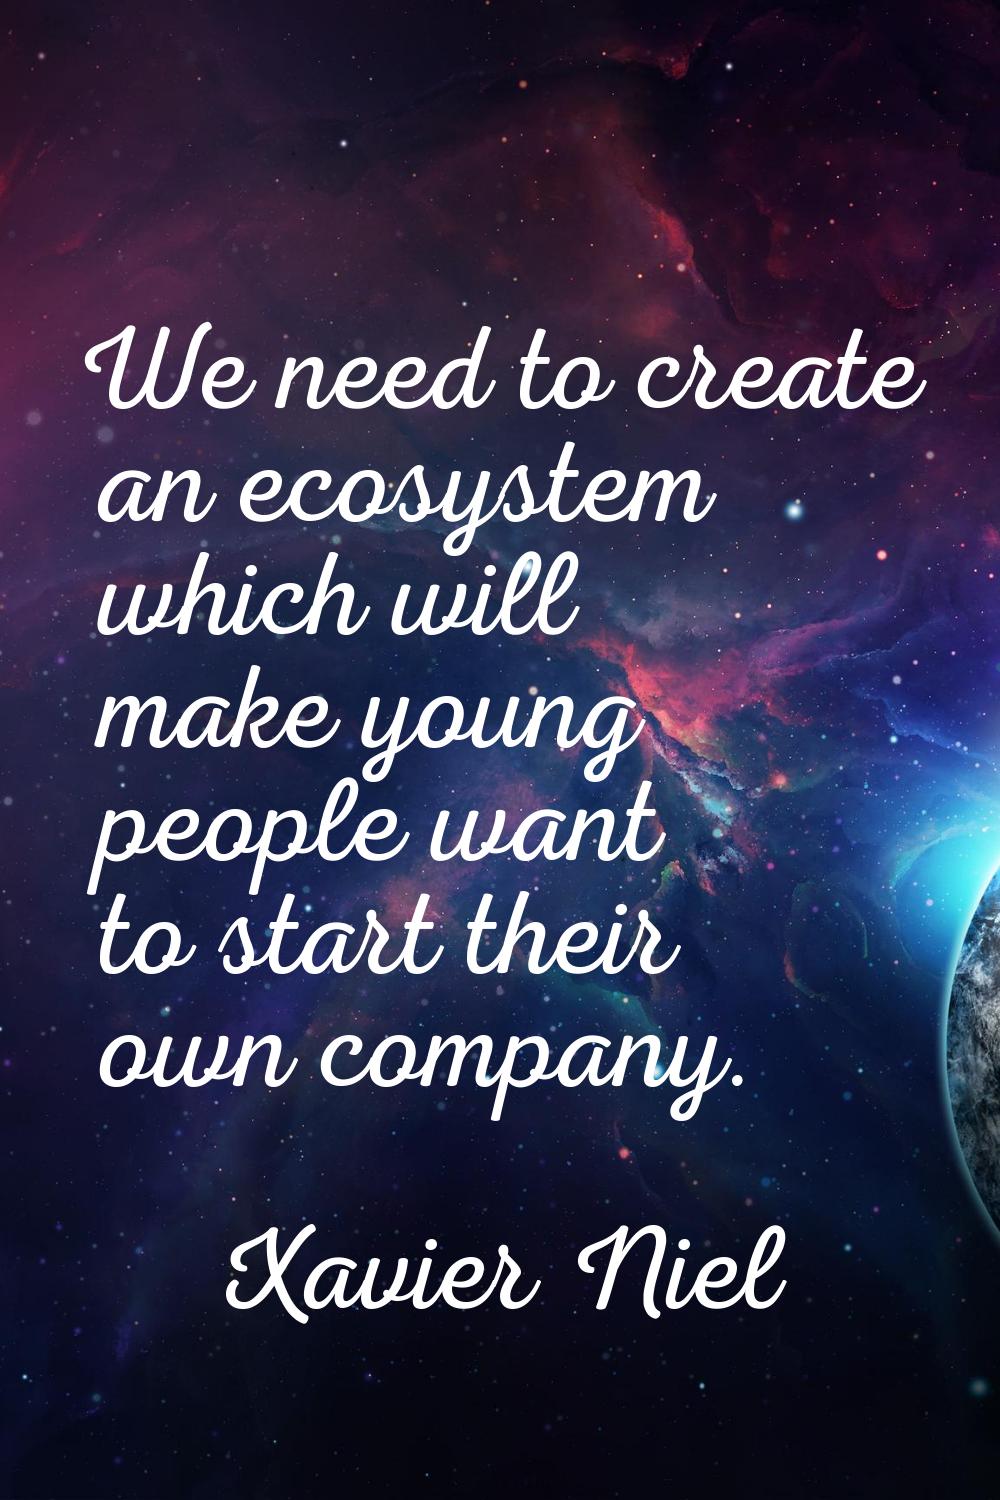 We need to create an ecosystem which will make young people want to start their own company.